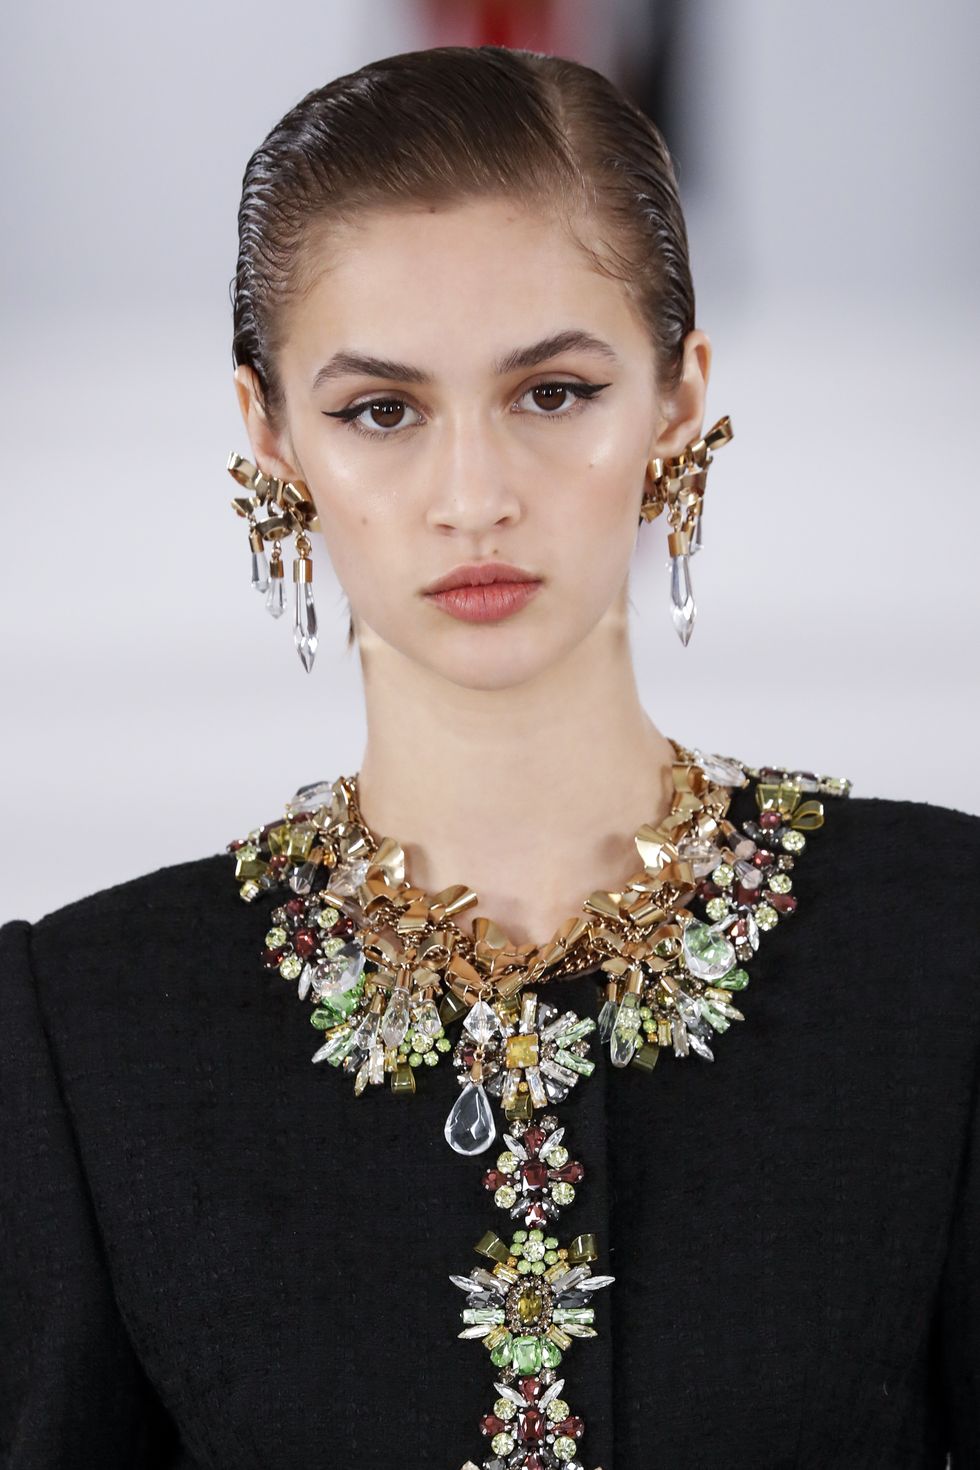 Get Chained: How To Wear The Latest Chunky Chain Jewelry Trend